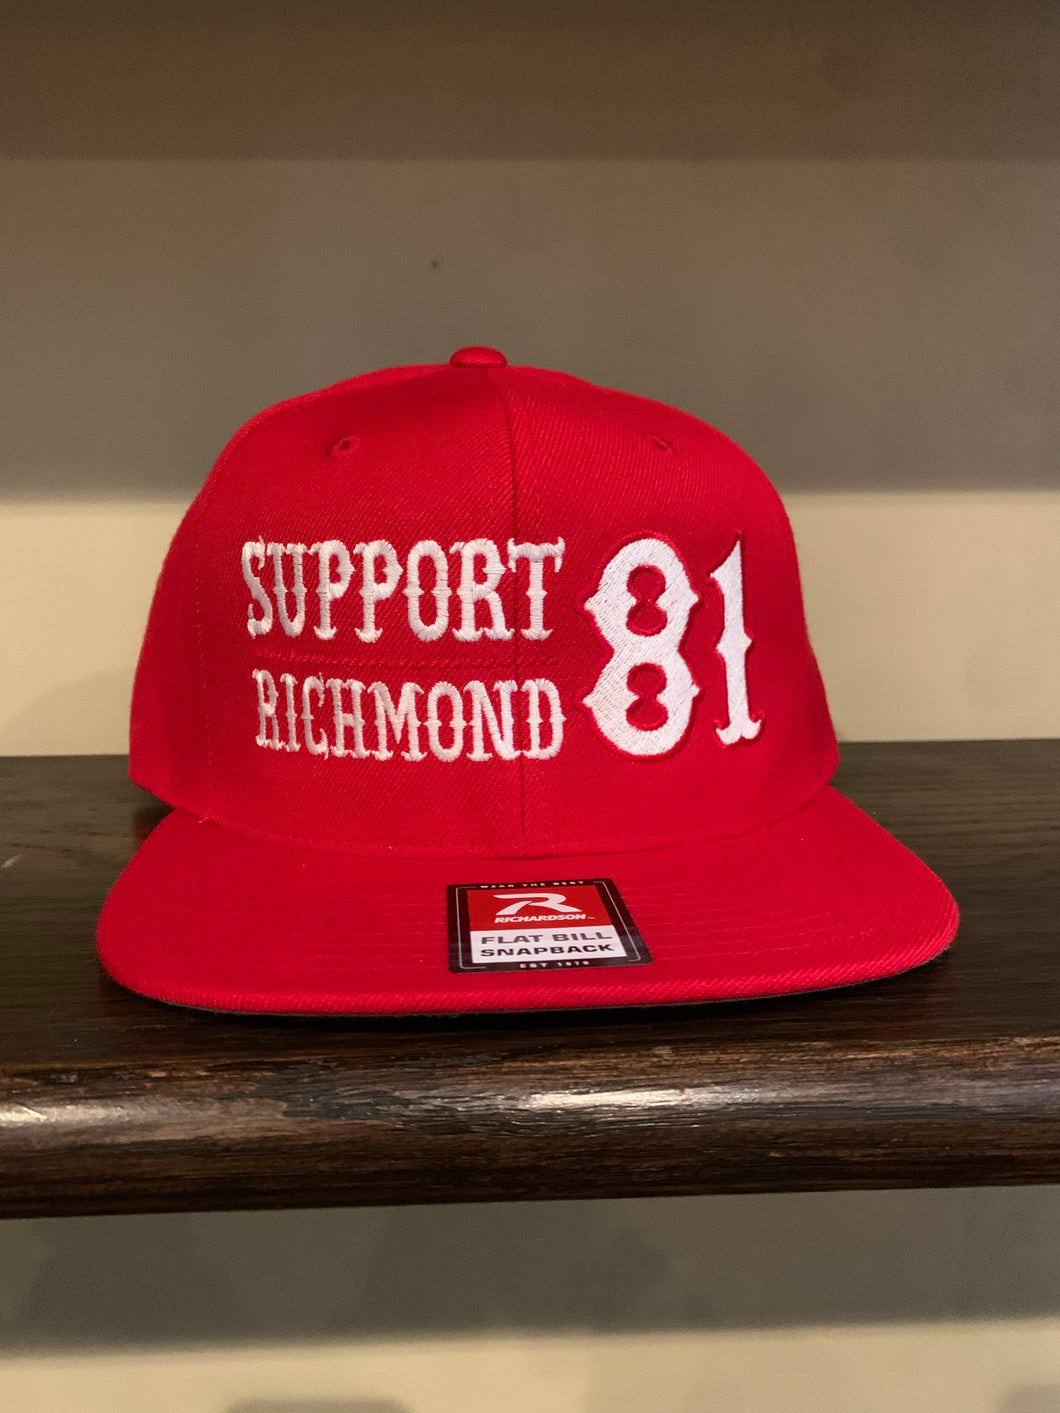 Red snap back with white writing